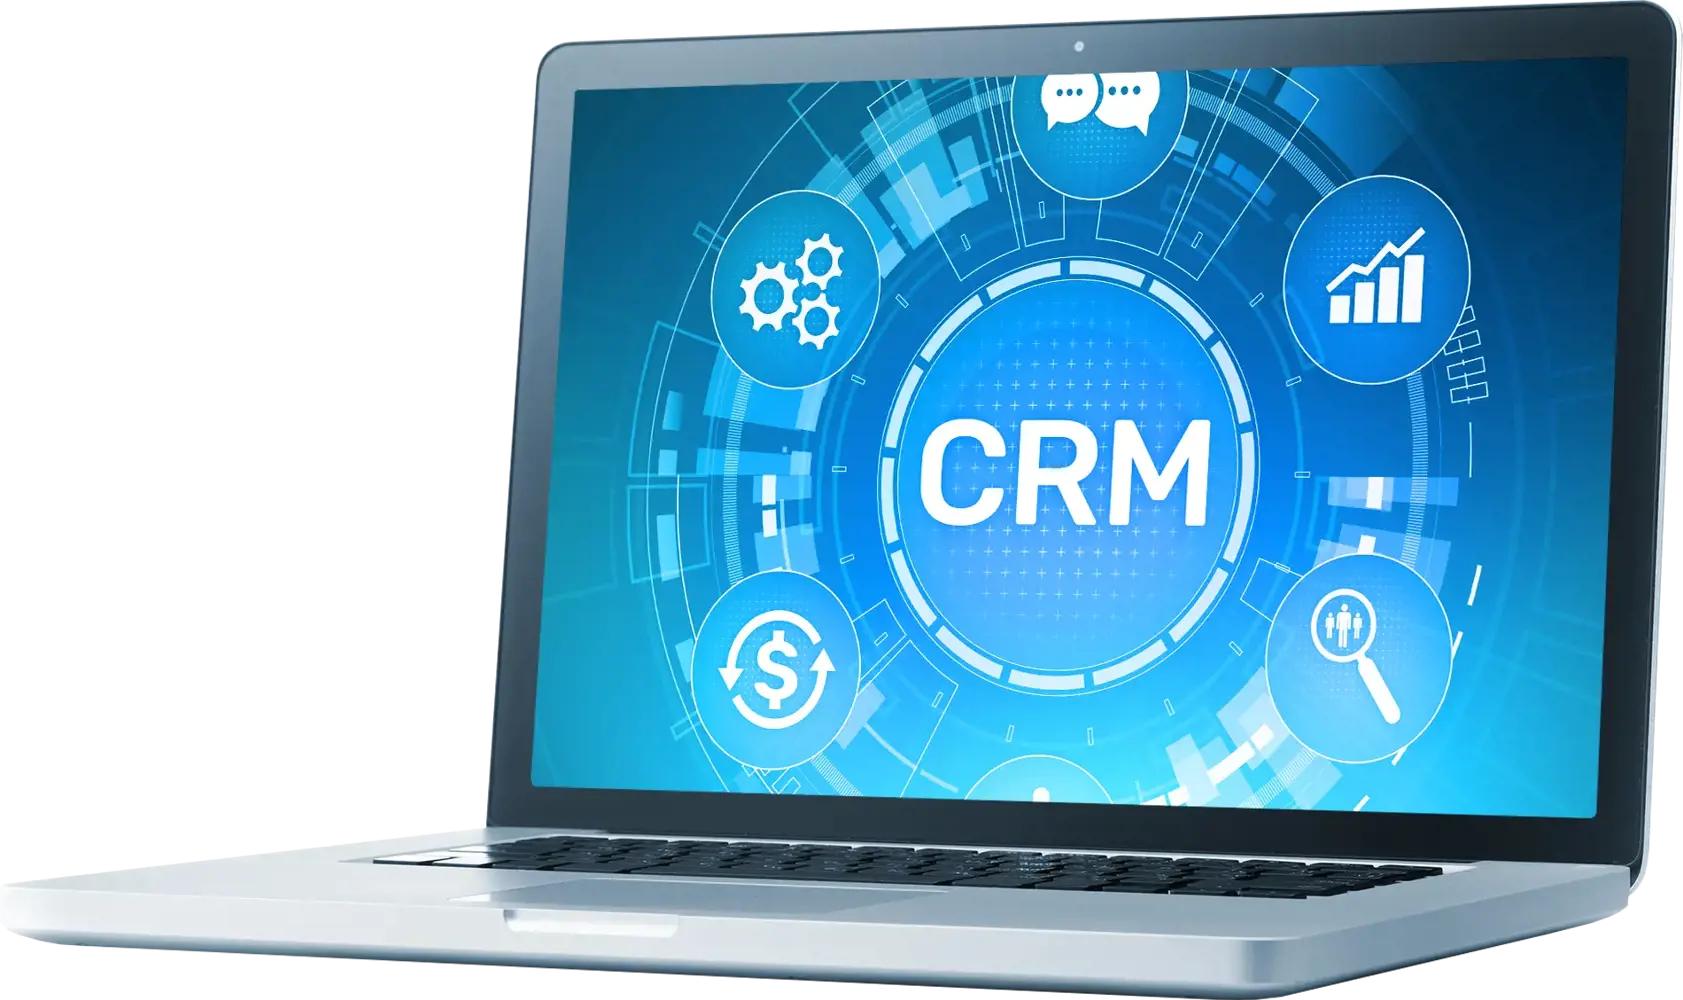 GET RID OF THE CHAOS IN YOUR BUSINESS RECORDS WITH QASIDA&nbsp;<span style="color:#438ed1;">CRM</span>